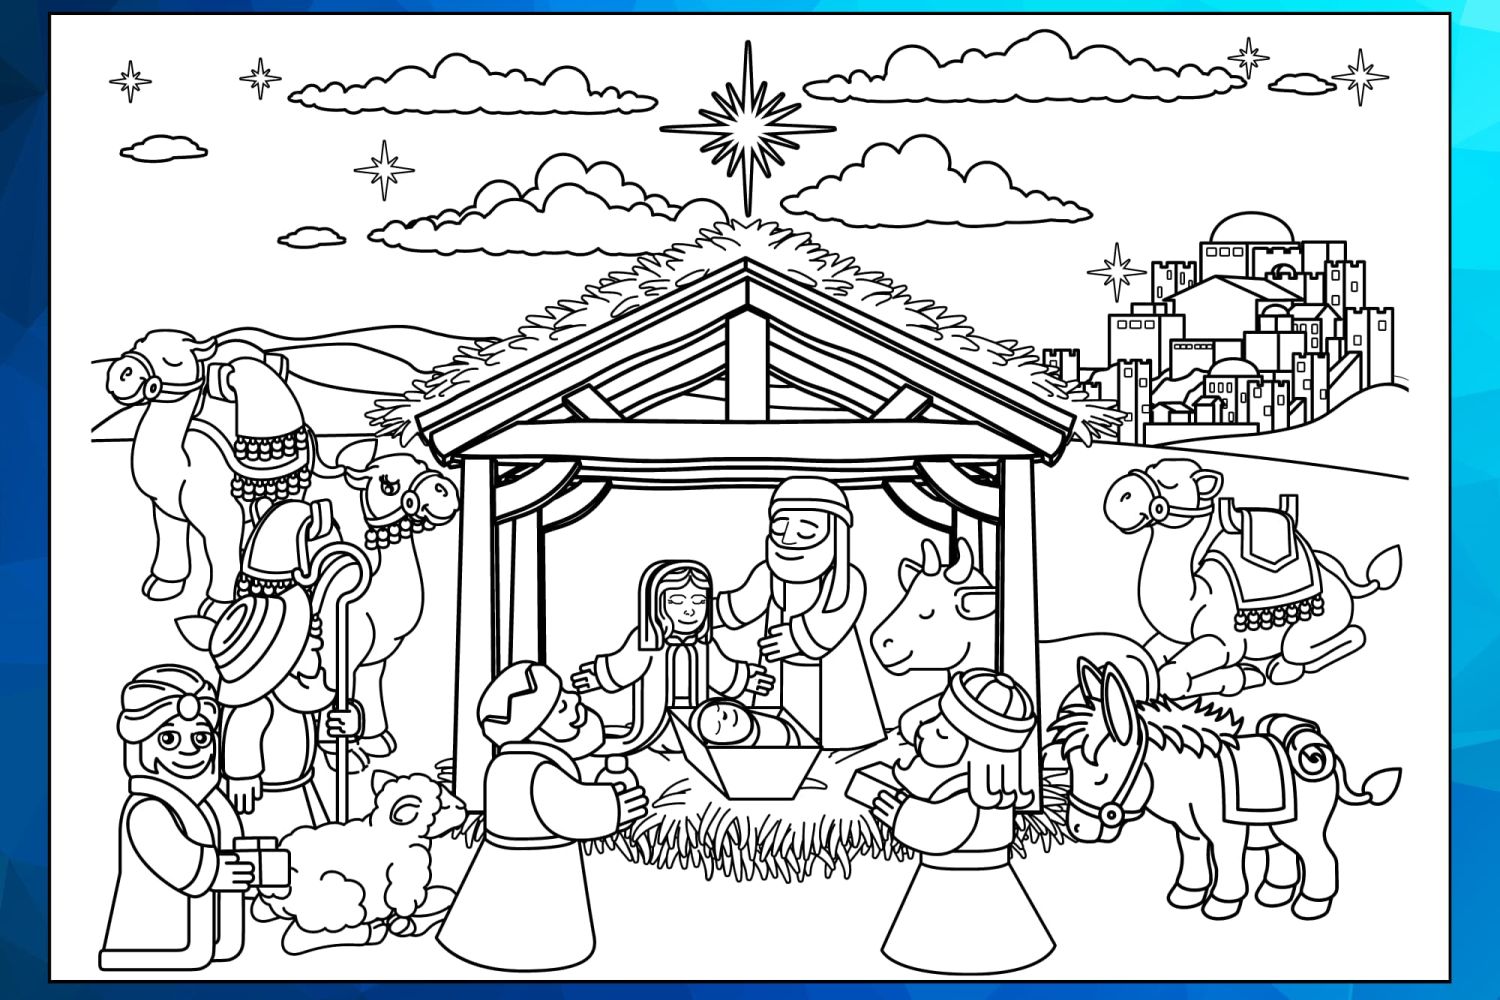 Nativity%20Scene%20Christmas%20Coloring%20Pages%20Worksheet%201-175b3fa4 Love / heart